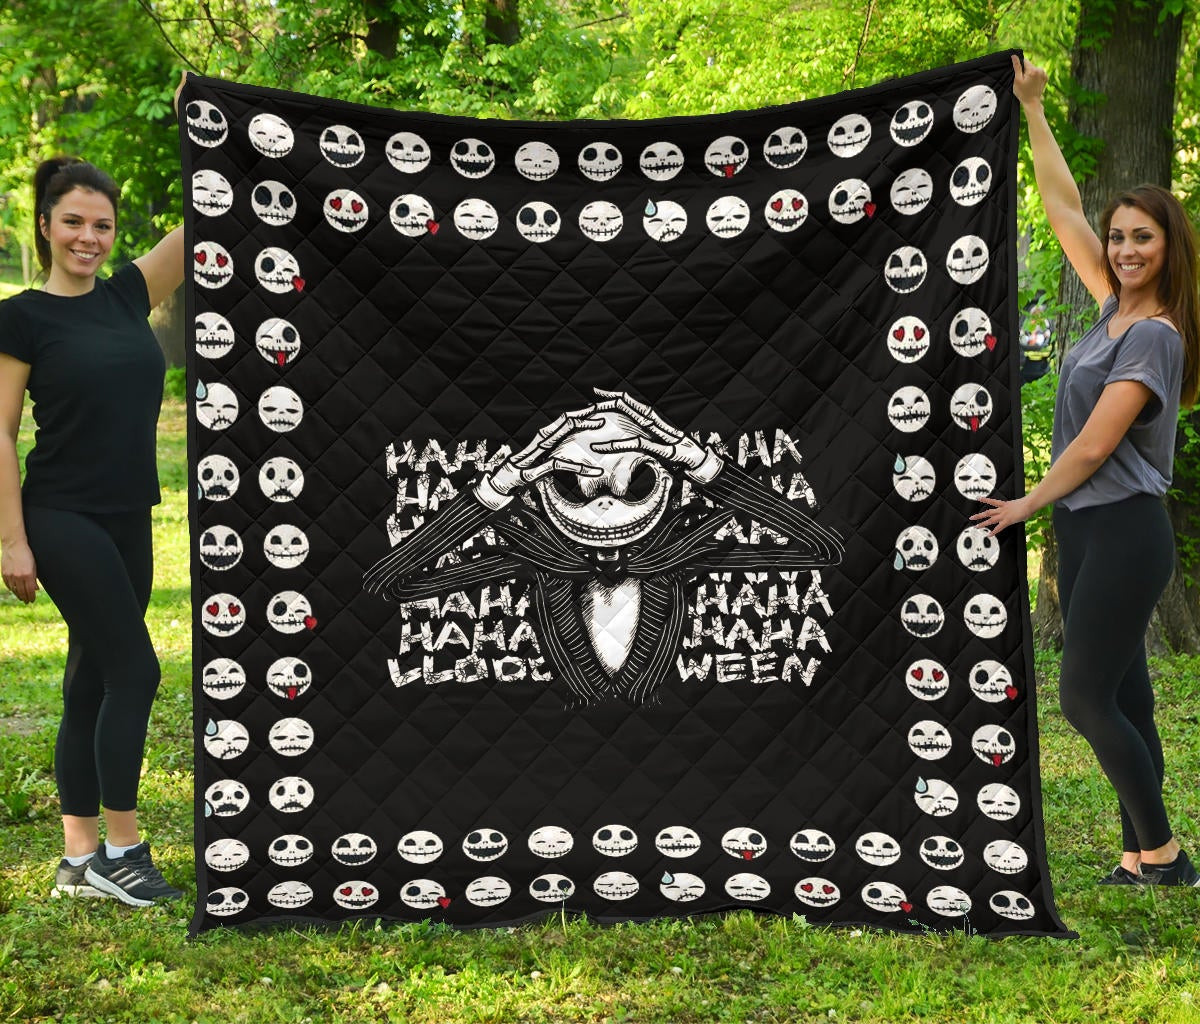 The Nightmare Before Christmas Cartoon Premium Quilt – Scary Smiling Jack Little Emotions Face Patterns Quilt Blanket